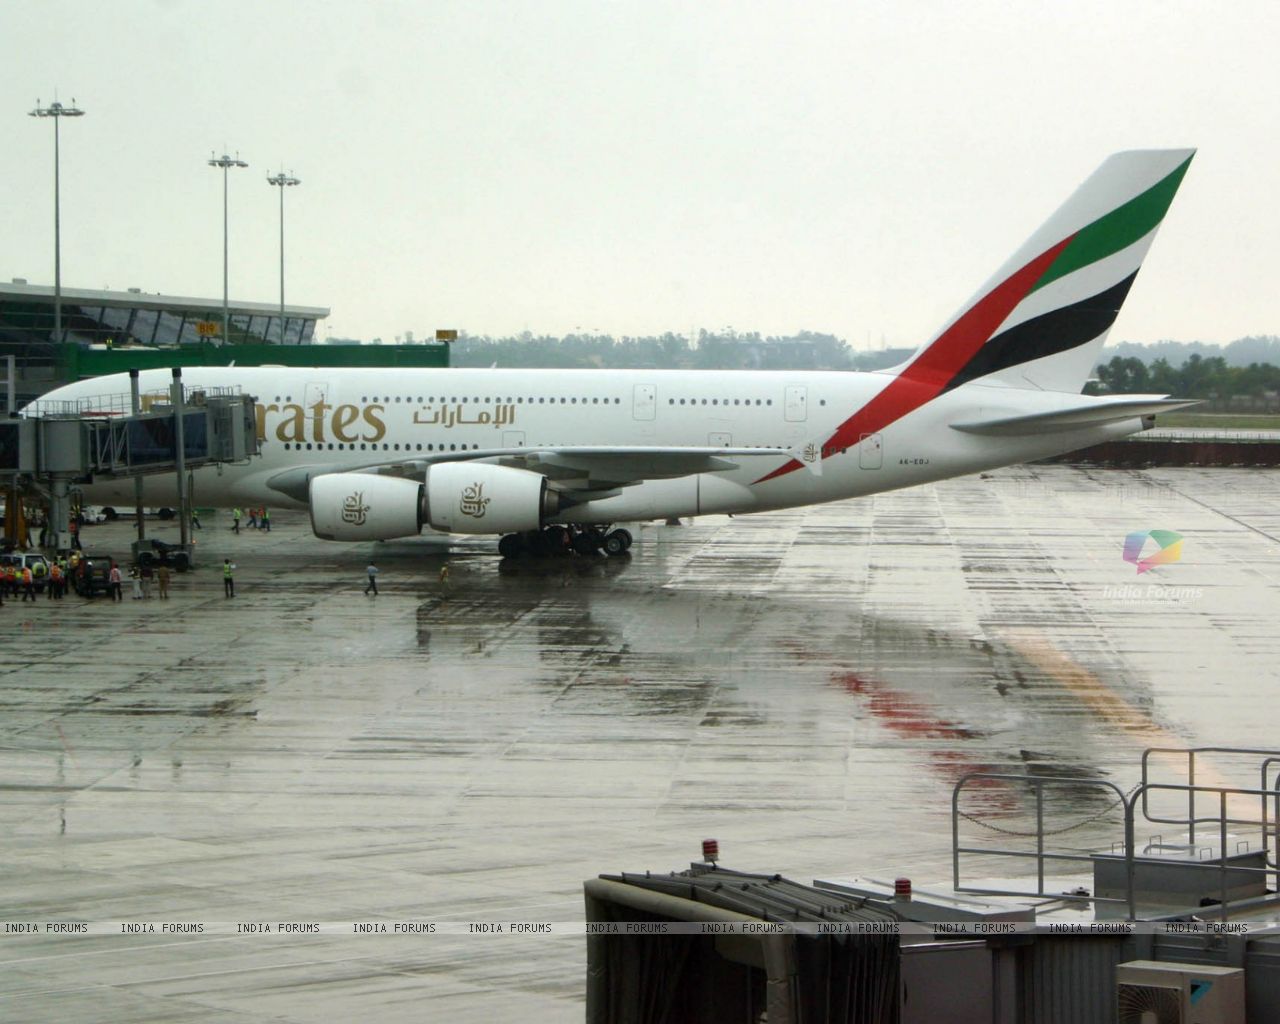 Wallpaper The Emirates Airbus A380 Arrived At Terminal Indira